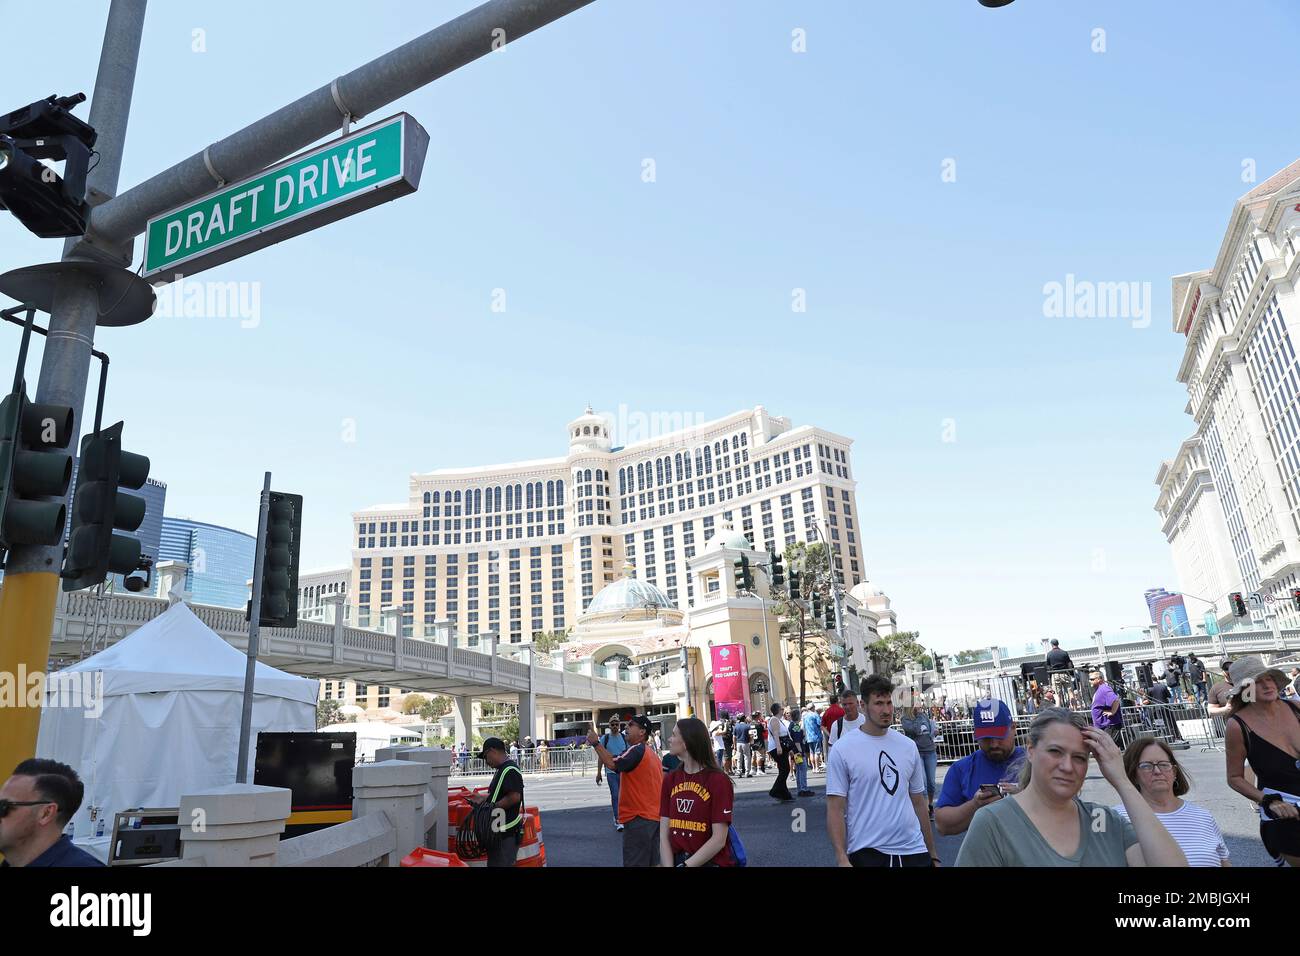 Fans walk underneath a Draft Drive ceremonial street sign on Thursday, April 28, 2022, in Las Vegas. The corner of Las Vegas Blvd. and Flamingo was temporarily renamed for the NFL Draft being held April 28-30. (AP Photo/Gregory Payan) Foto de stock